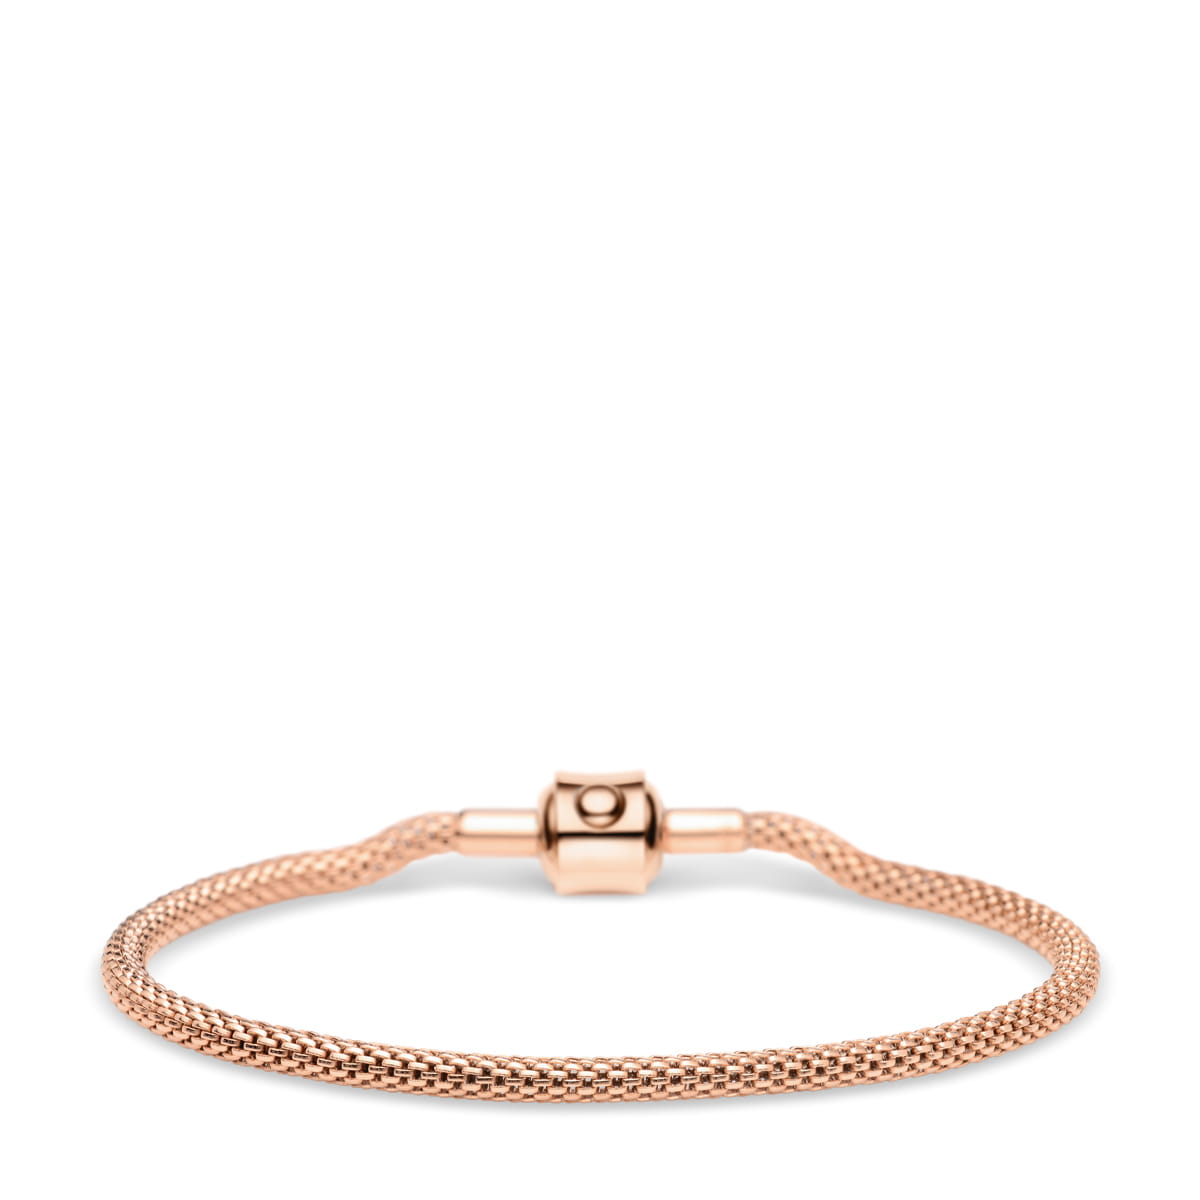 Armband in roségold